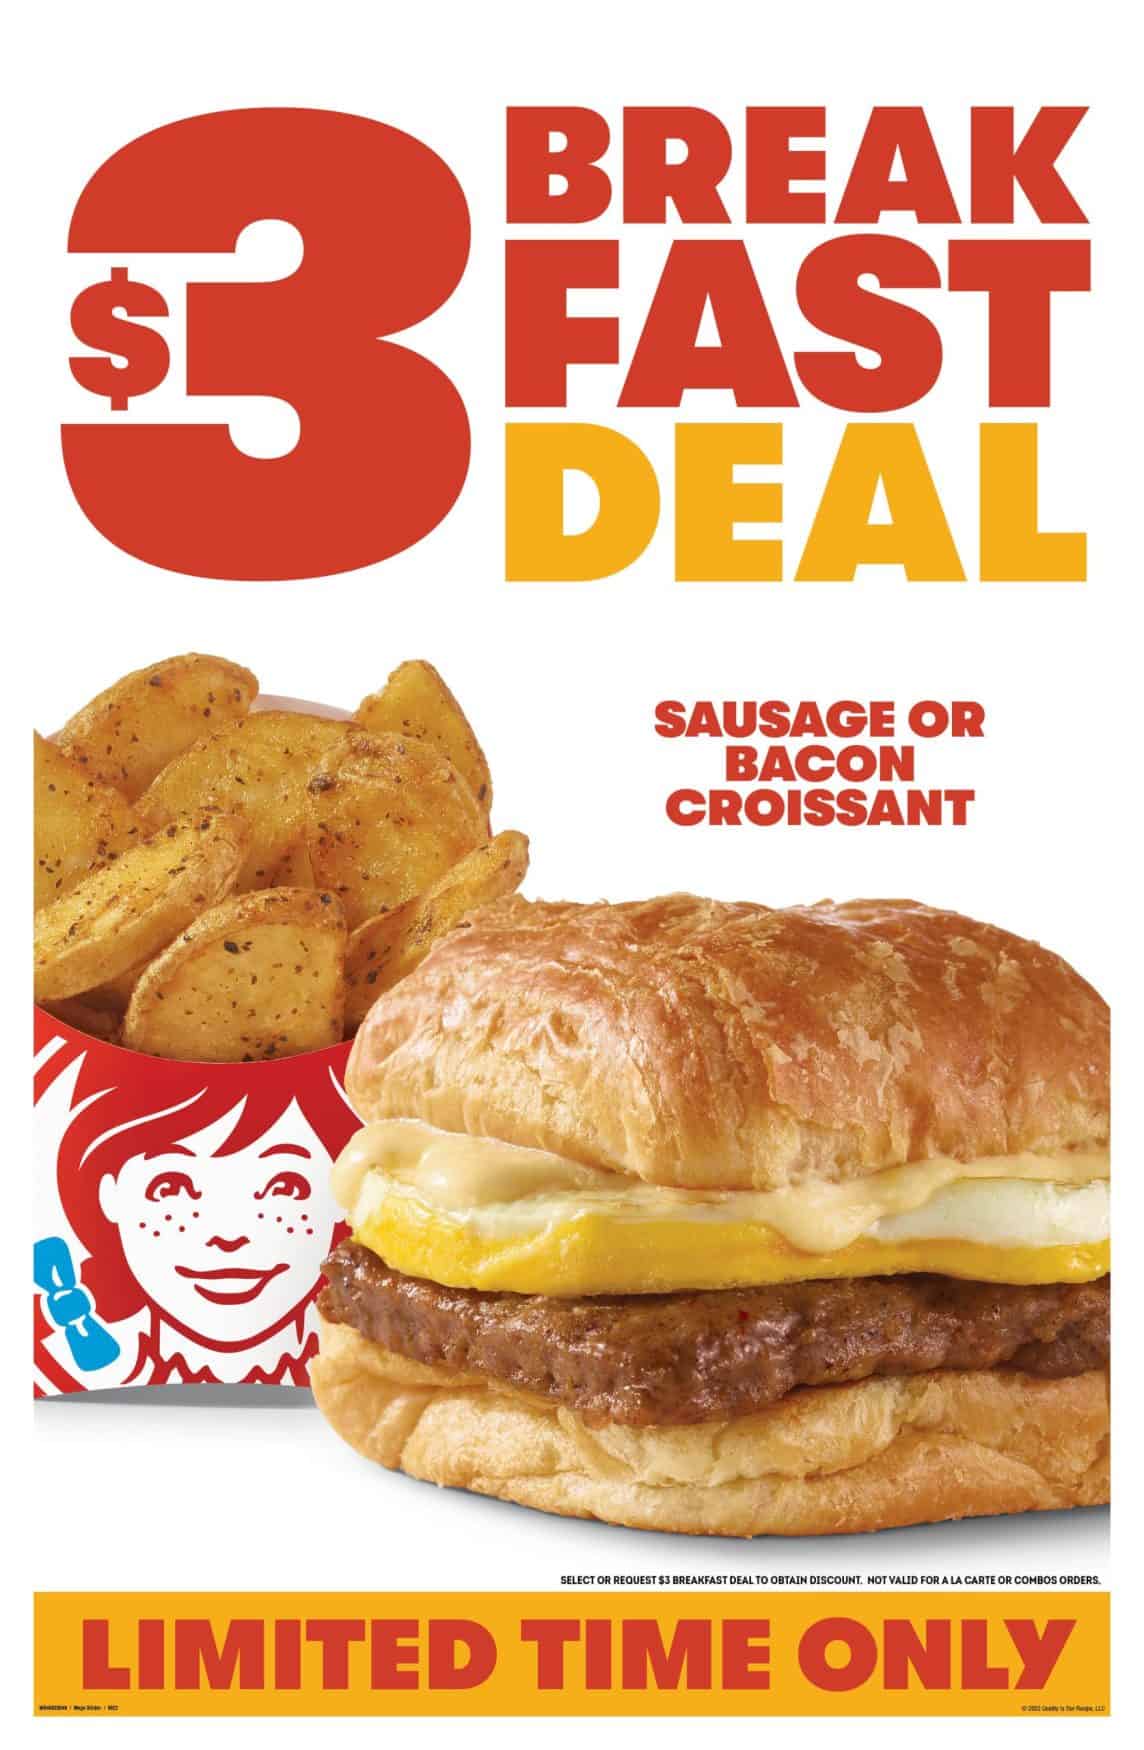 enjoy-3-breakfast-deal-at-wendy-s-living-on-the-cheap